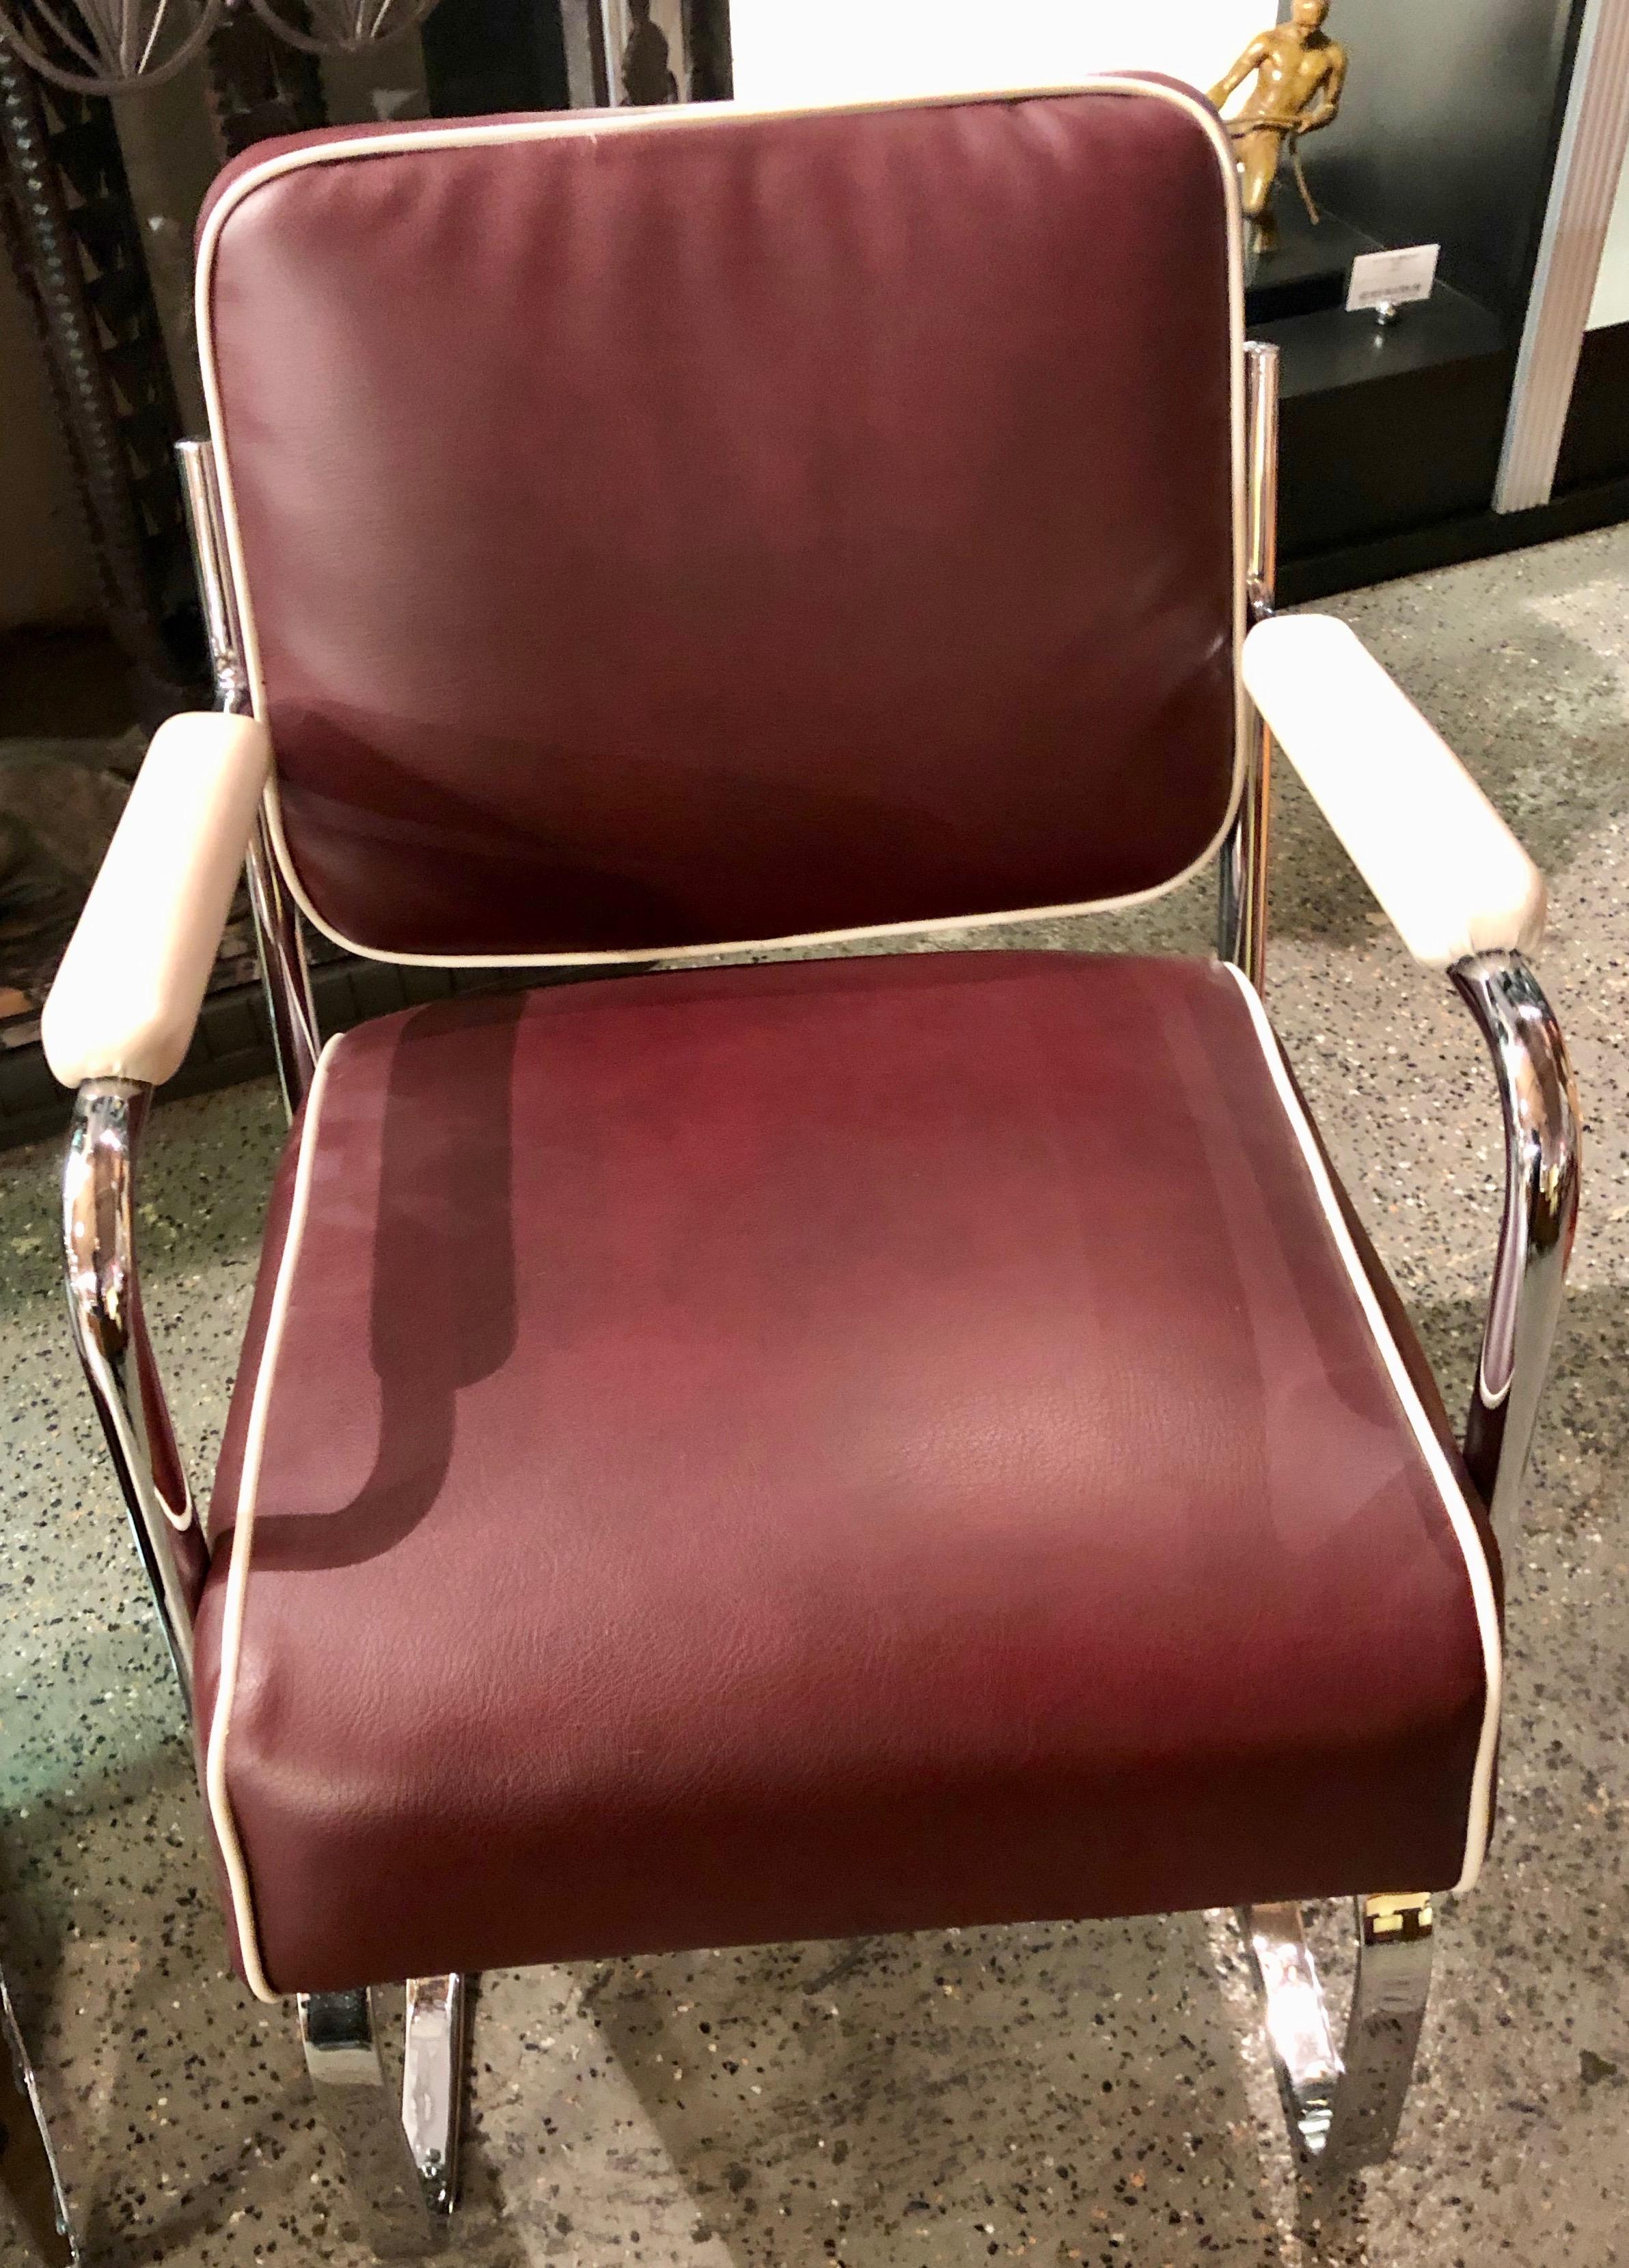 Restored flexible metal two-tone Art Deco club chairs. Fun unusual chairs with a very relaxed style. Made in USA, these Industrial style tubular machine made cantilever lounge chairs are a great addition to your Art Deco or midcentury room.